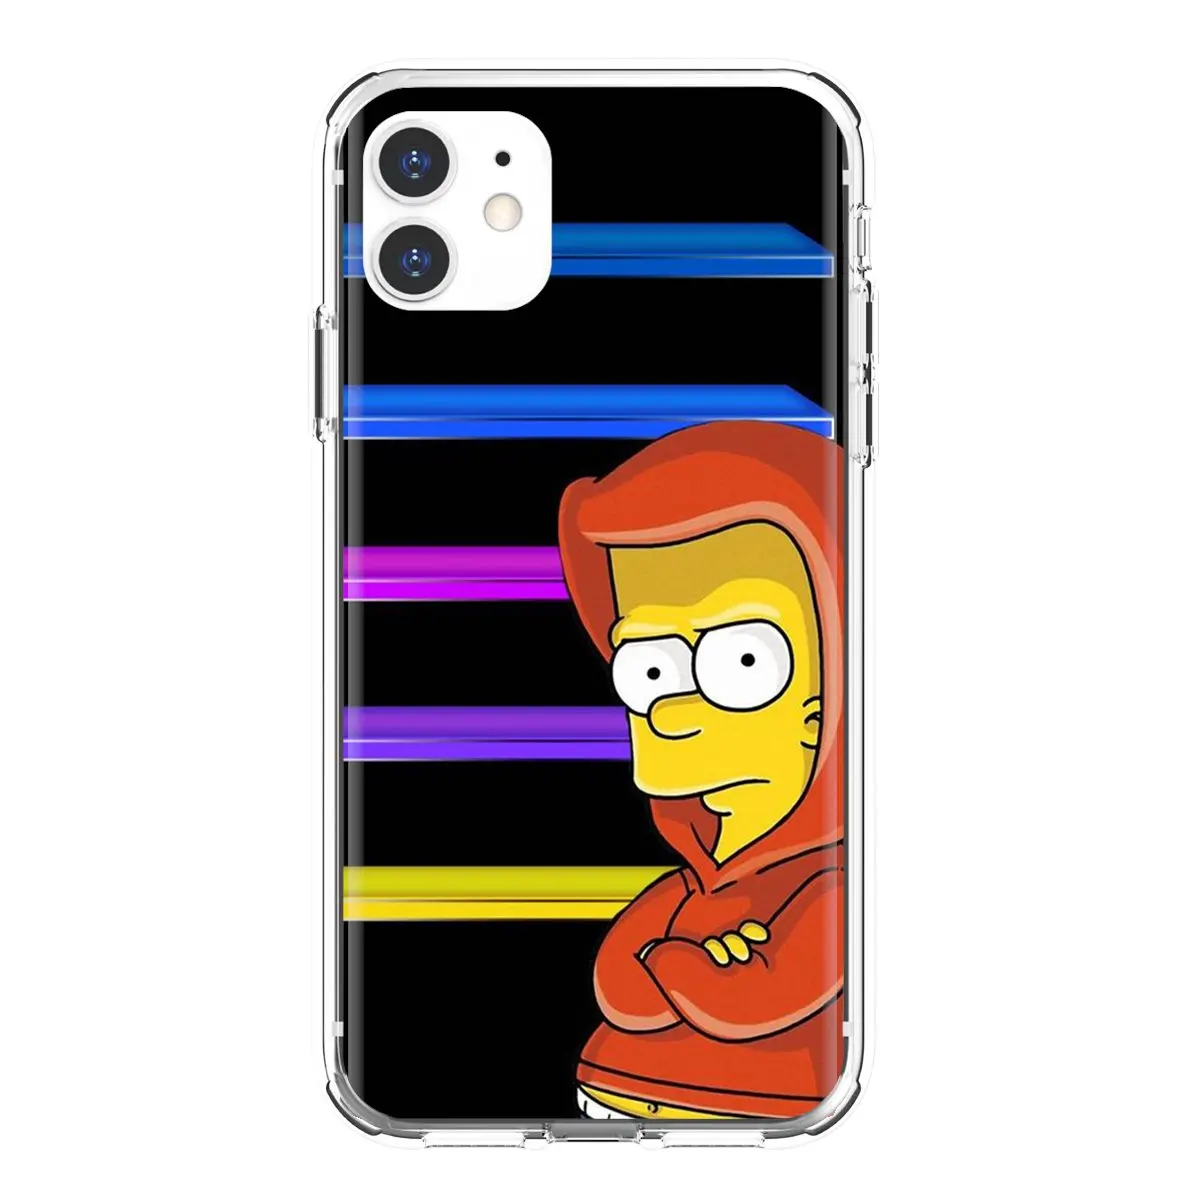 Case For iPod Touch 5 6 Xiaomi Redmi S2 6 Pro 5A Pocophone F1 LG G6 Q6 Q7 G5 Homer-Simpson images - 6